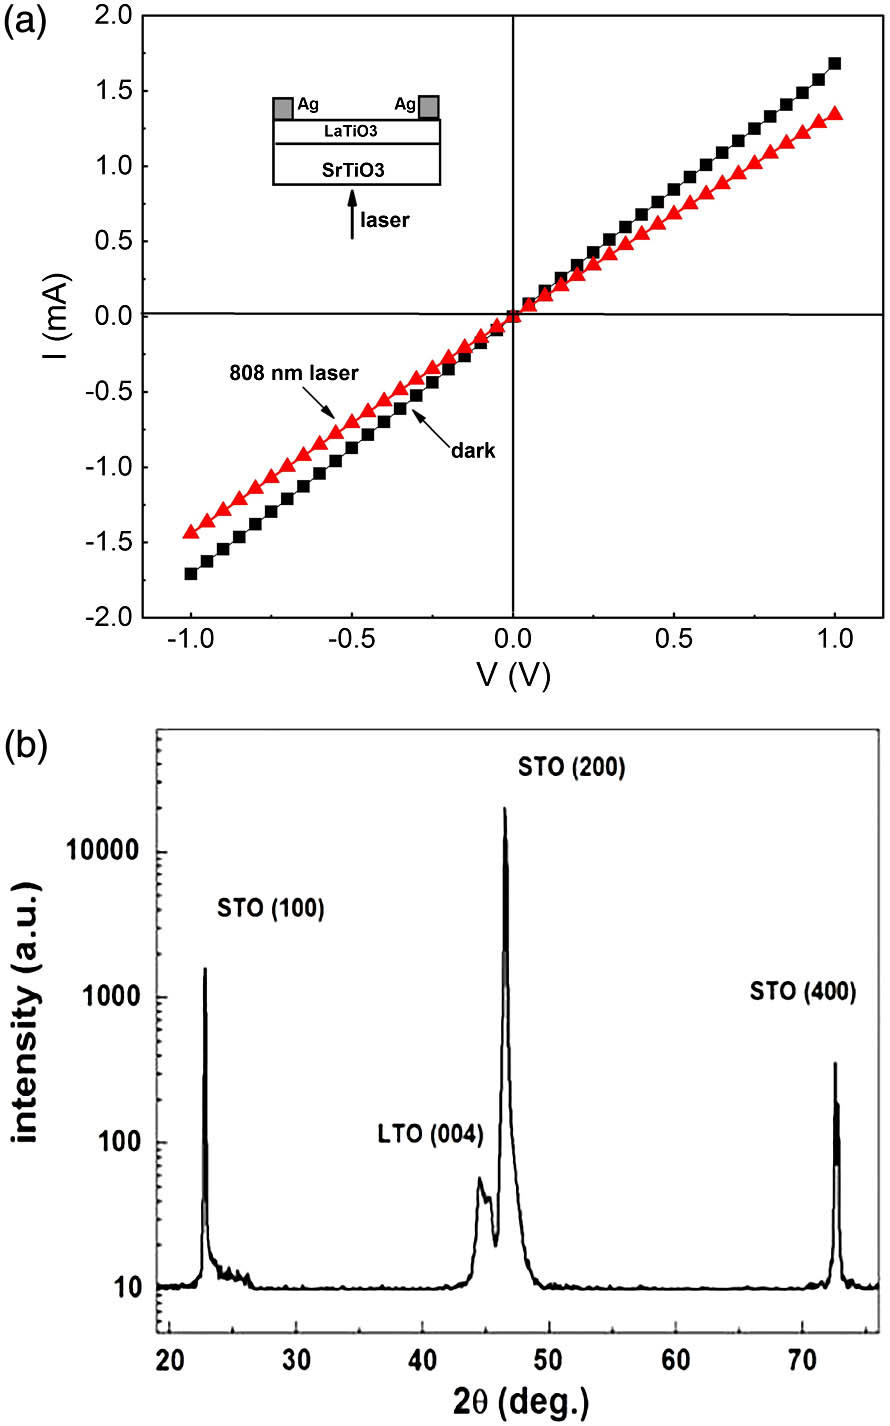 (a) Typical I-V characteristics of the LTO/STO at room temperature. The insets show the schematic measurement setup. (b) XRD pattern of LTO/STO sample.